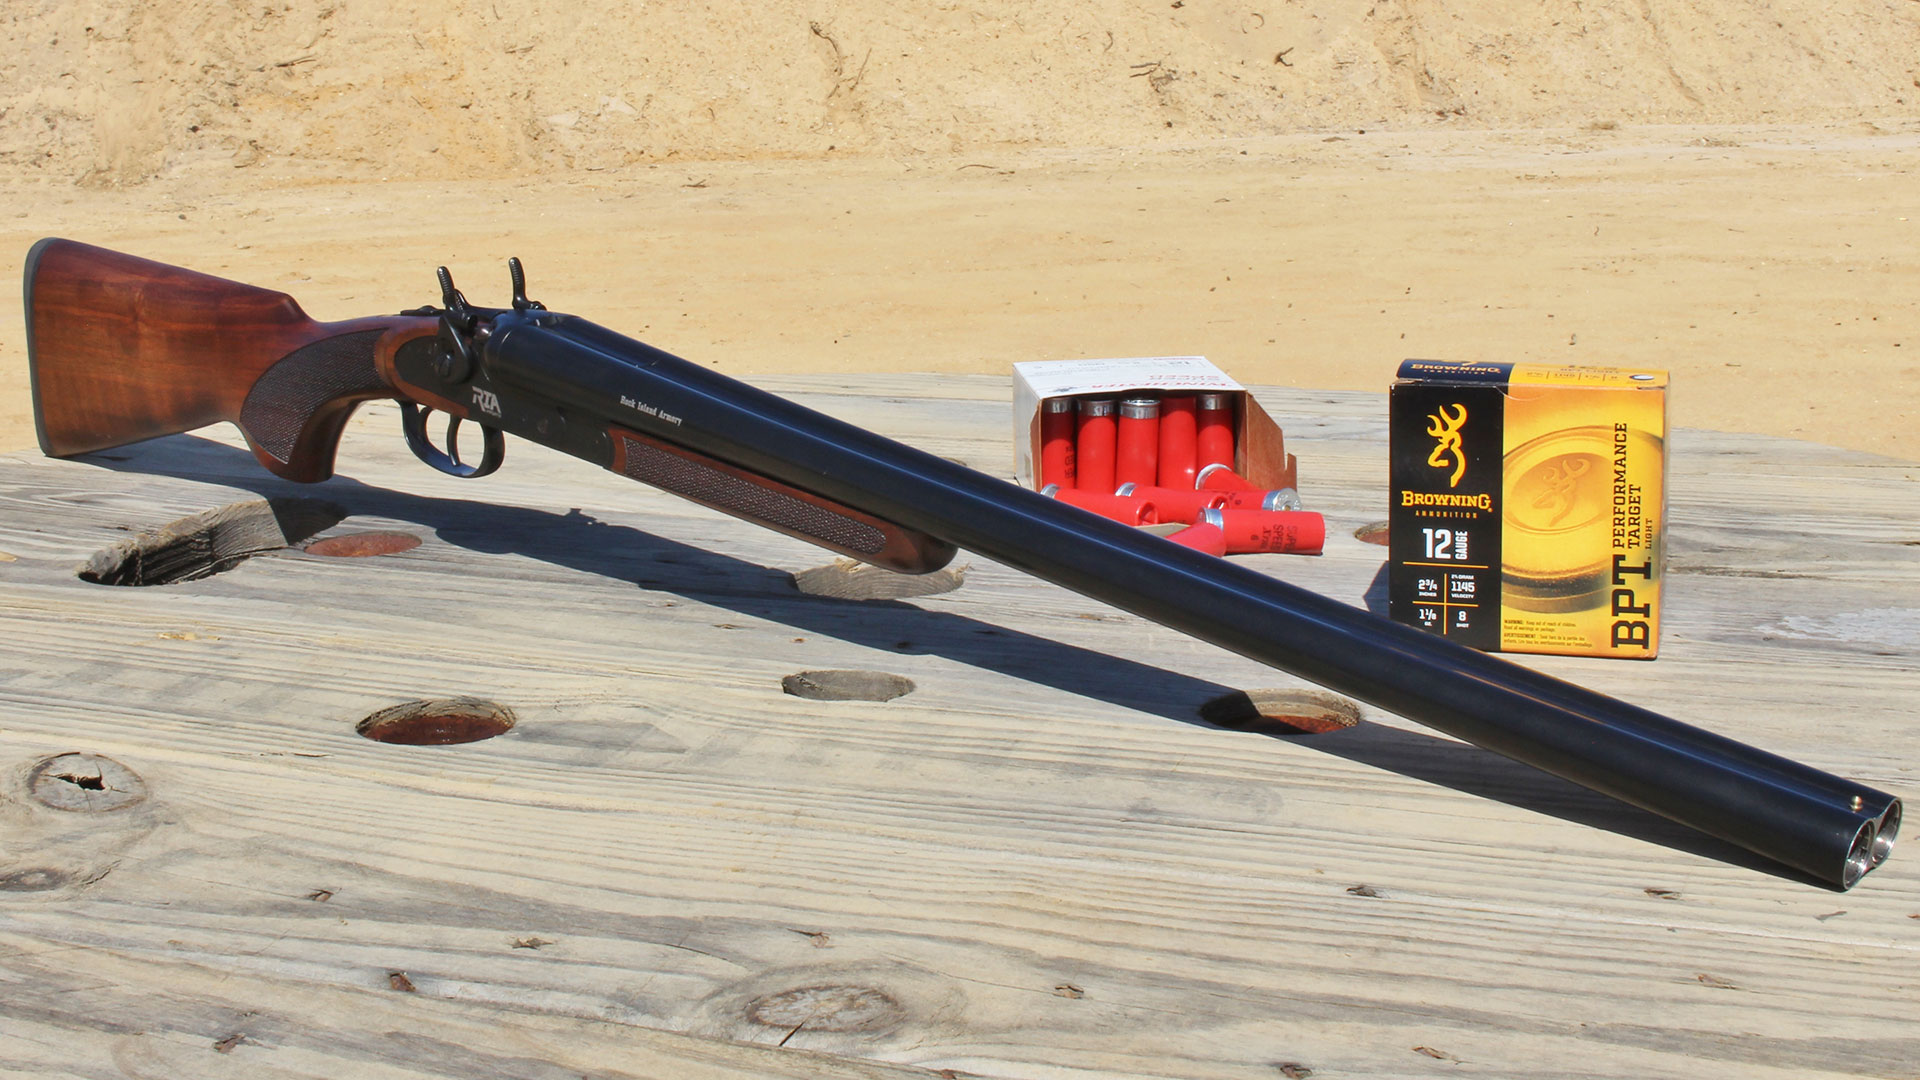 Rock Island Armory Side-By-Side 12 gauge shotgun double barrel on table with ammo.